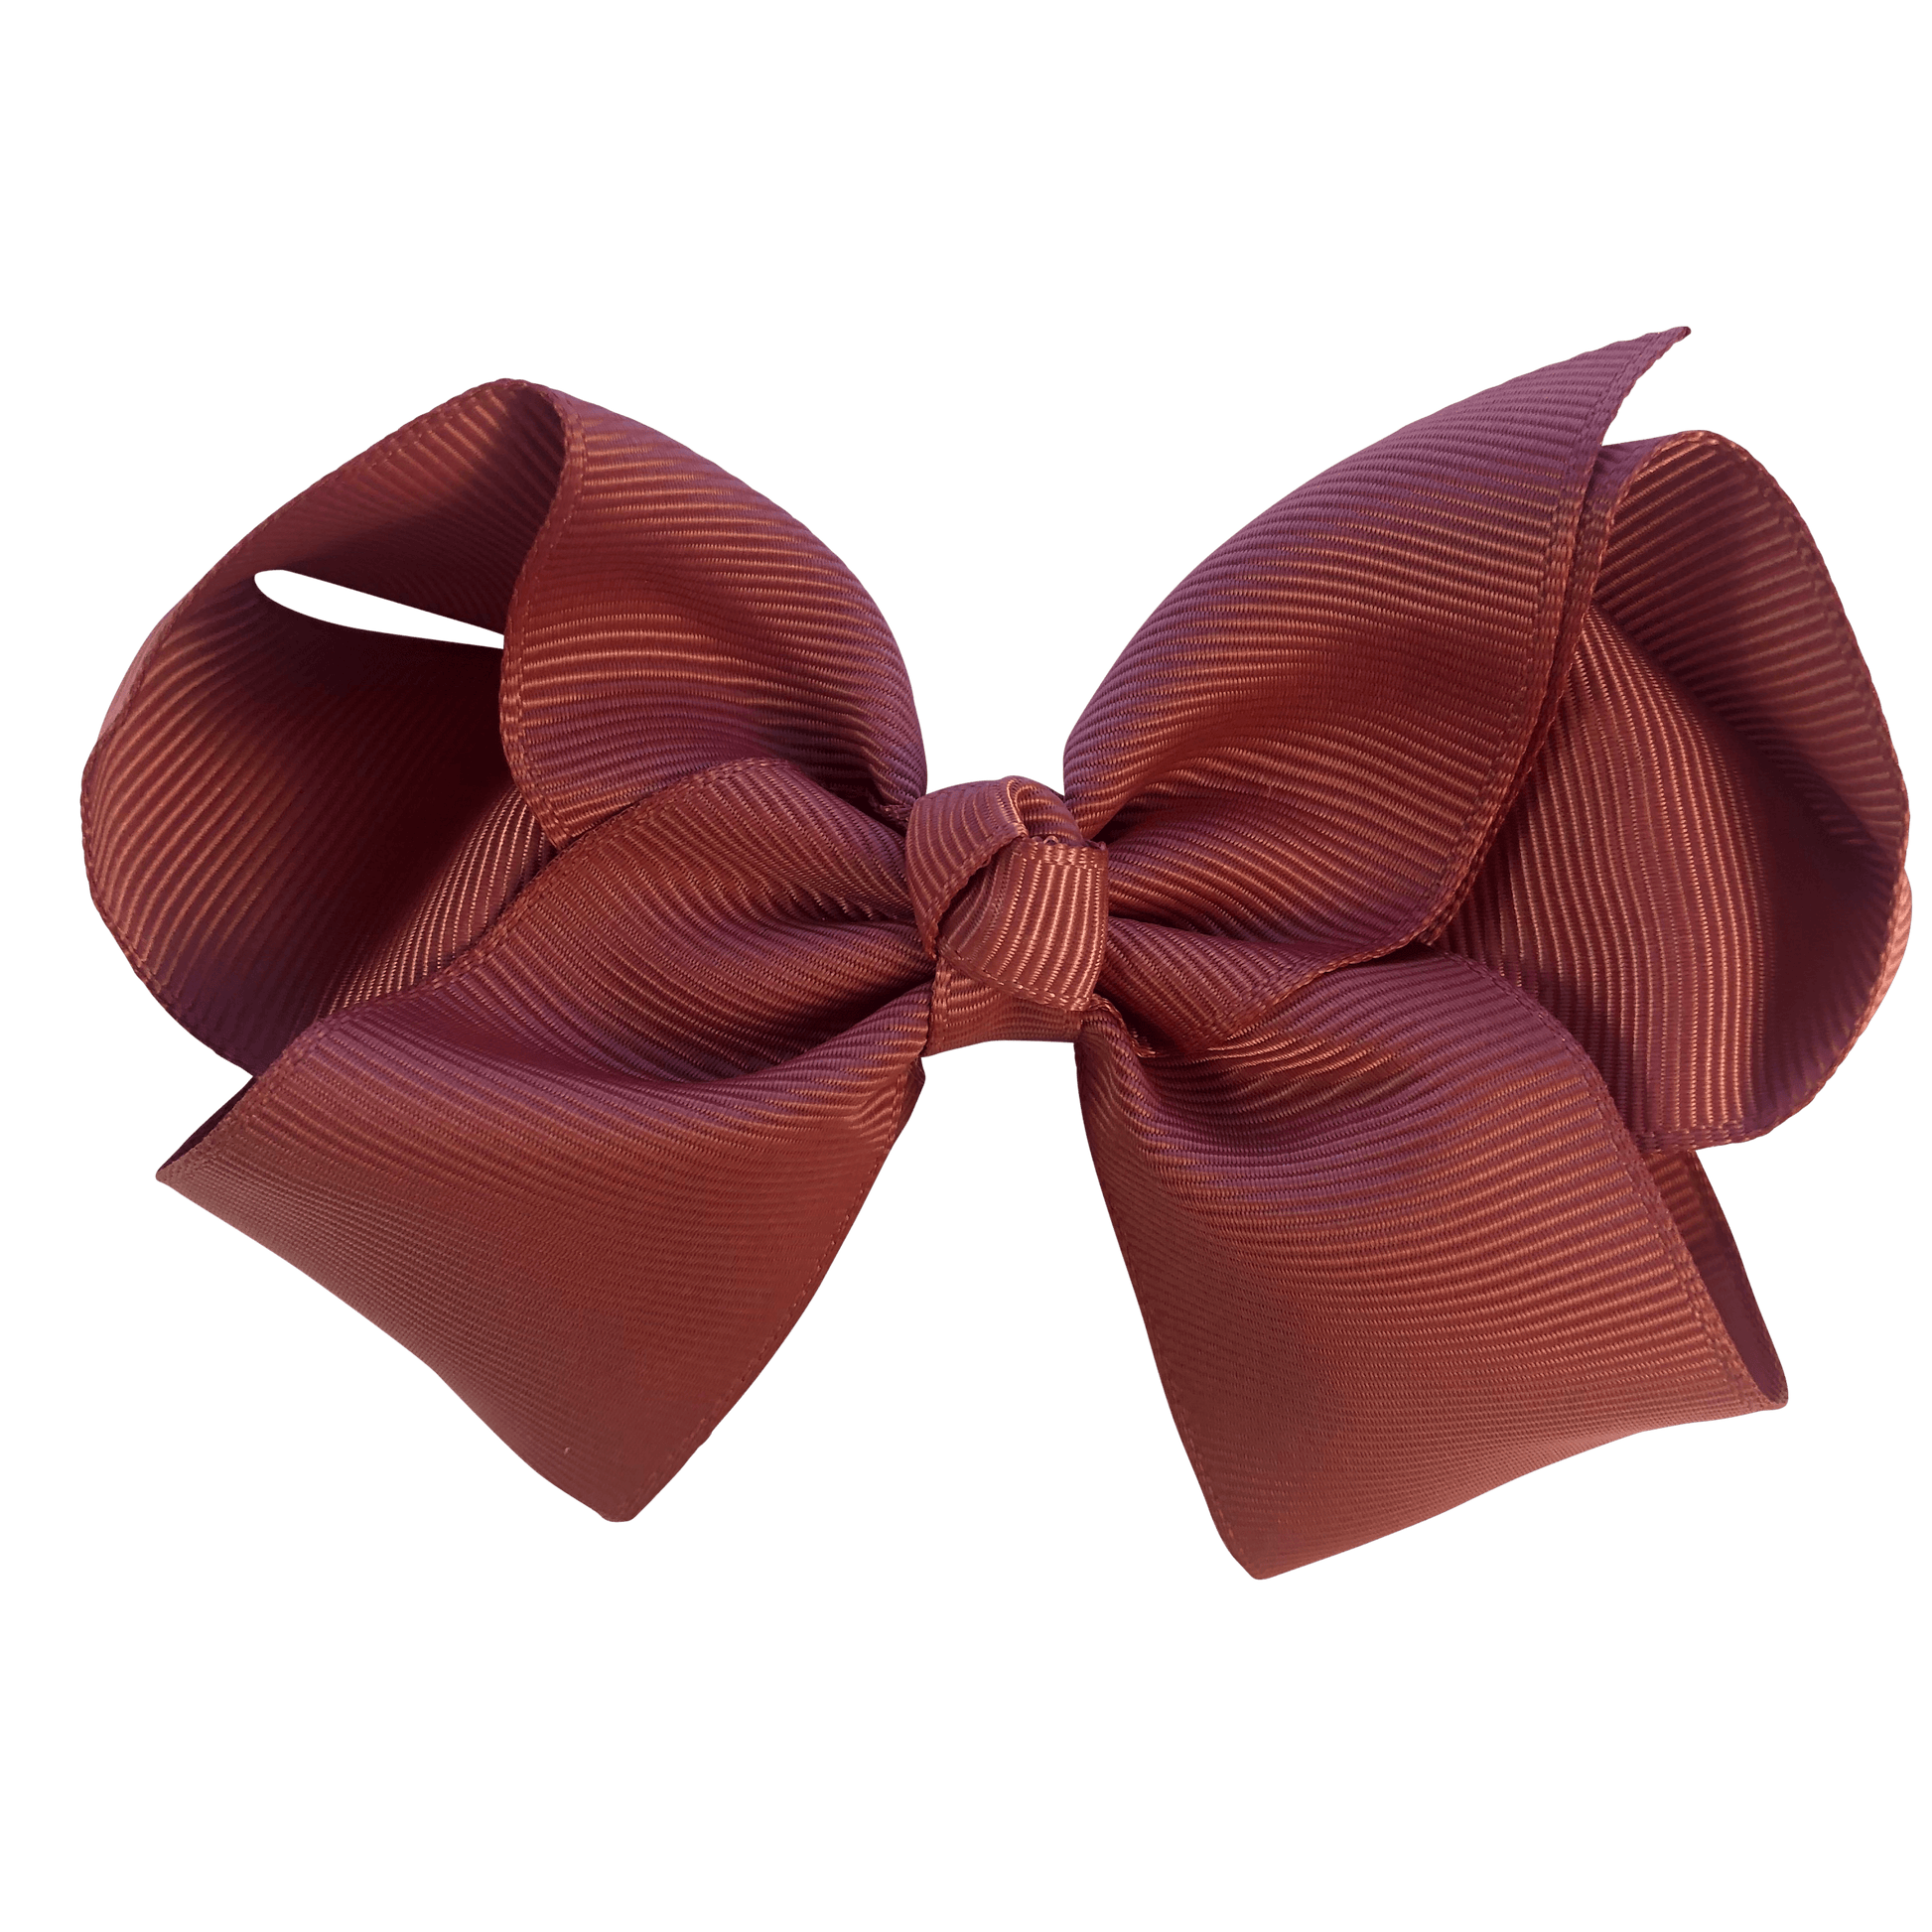 Best Friends / BFF Bow - Hair clips - School Uniform Hair Accessories - Ponytails and Fairytales